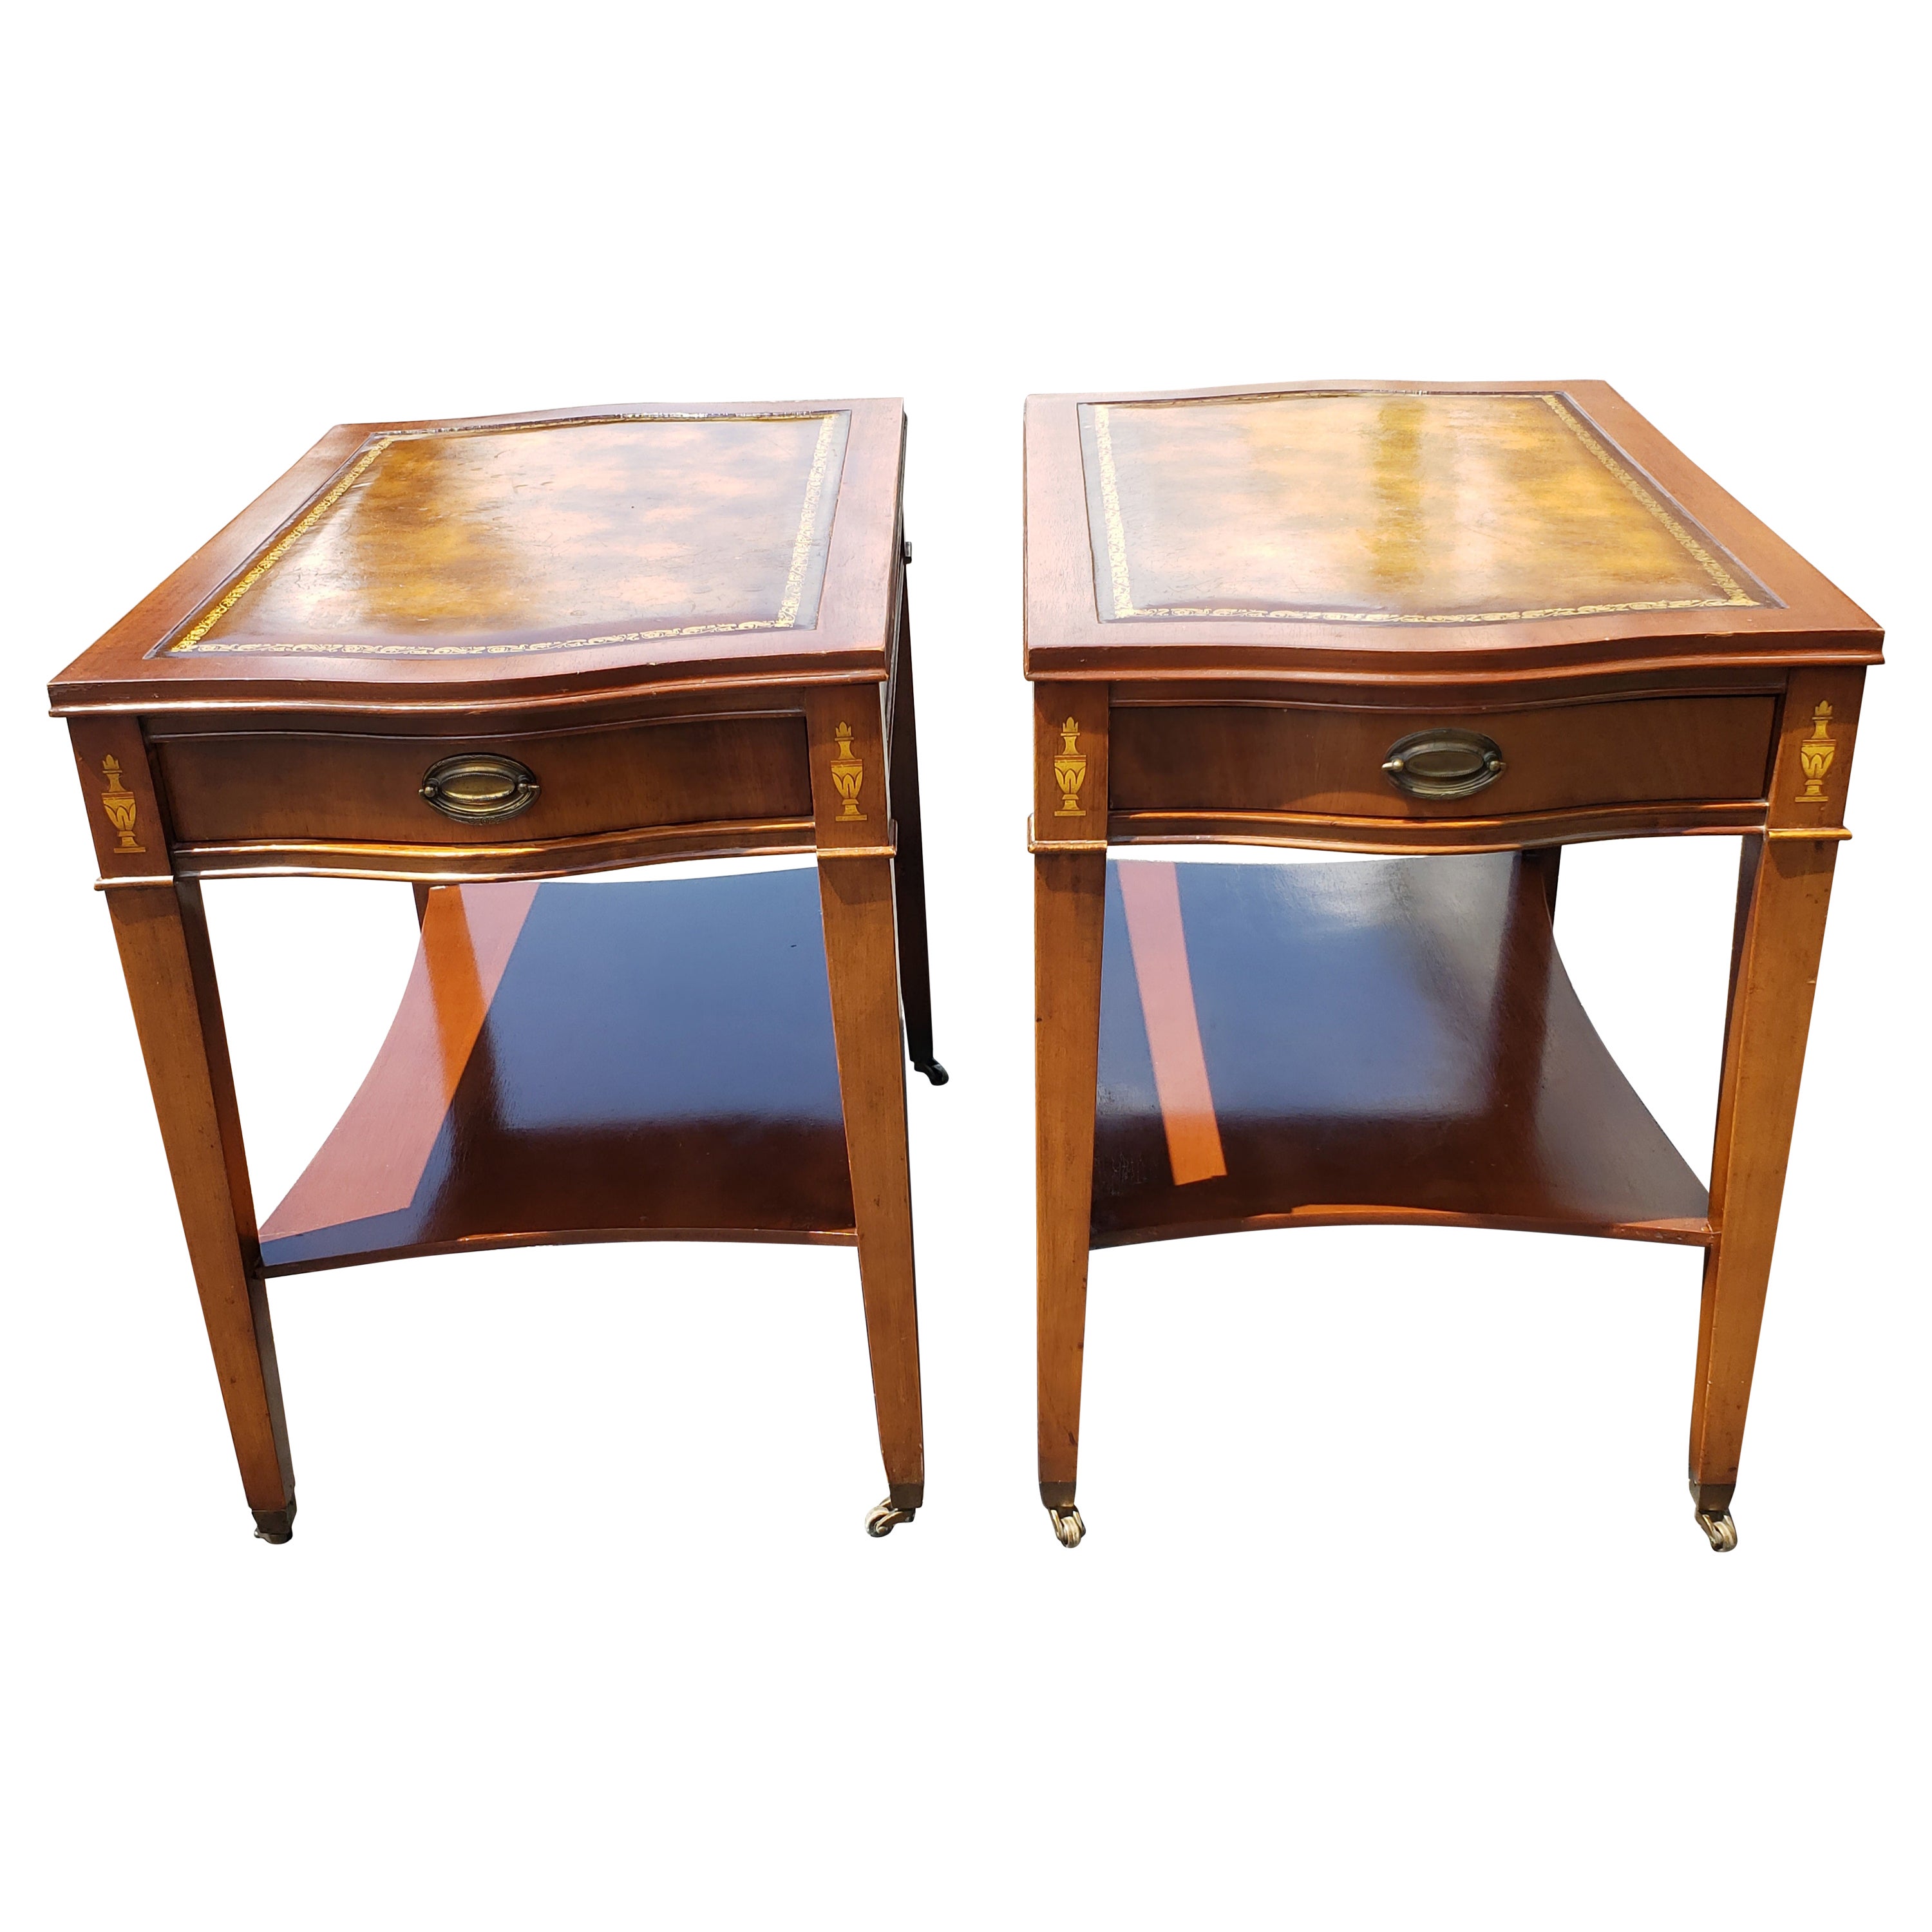 1958 Hollywood Regency Mahogany Inlay Tooled Leather Top and Gilt Stencil Tables For Sale